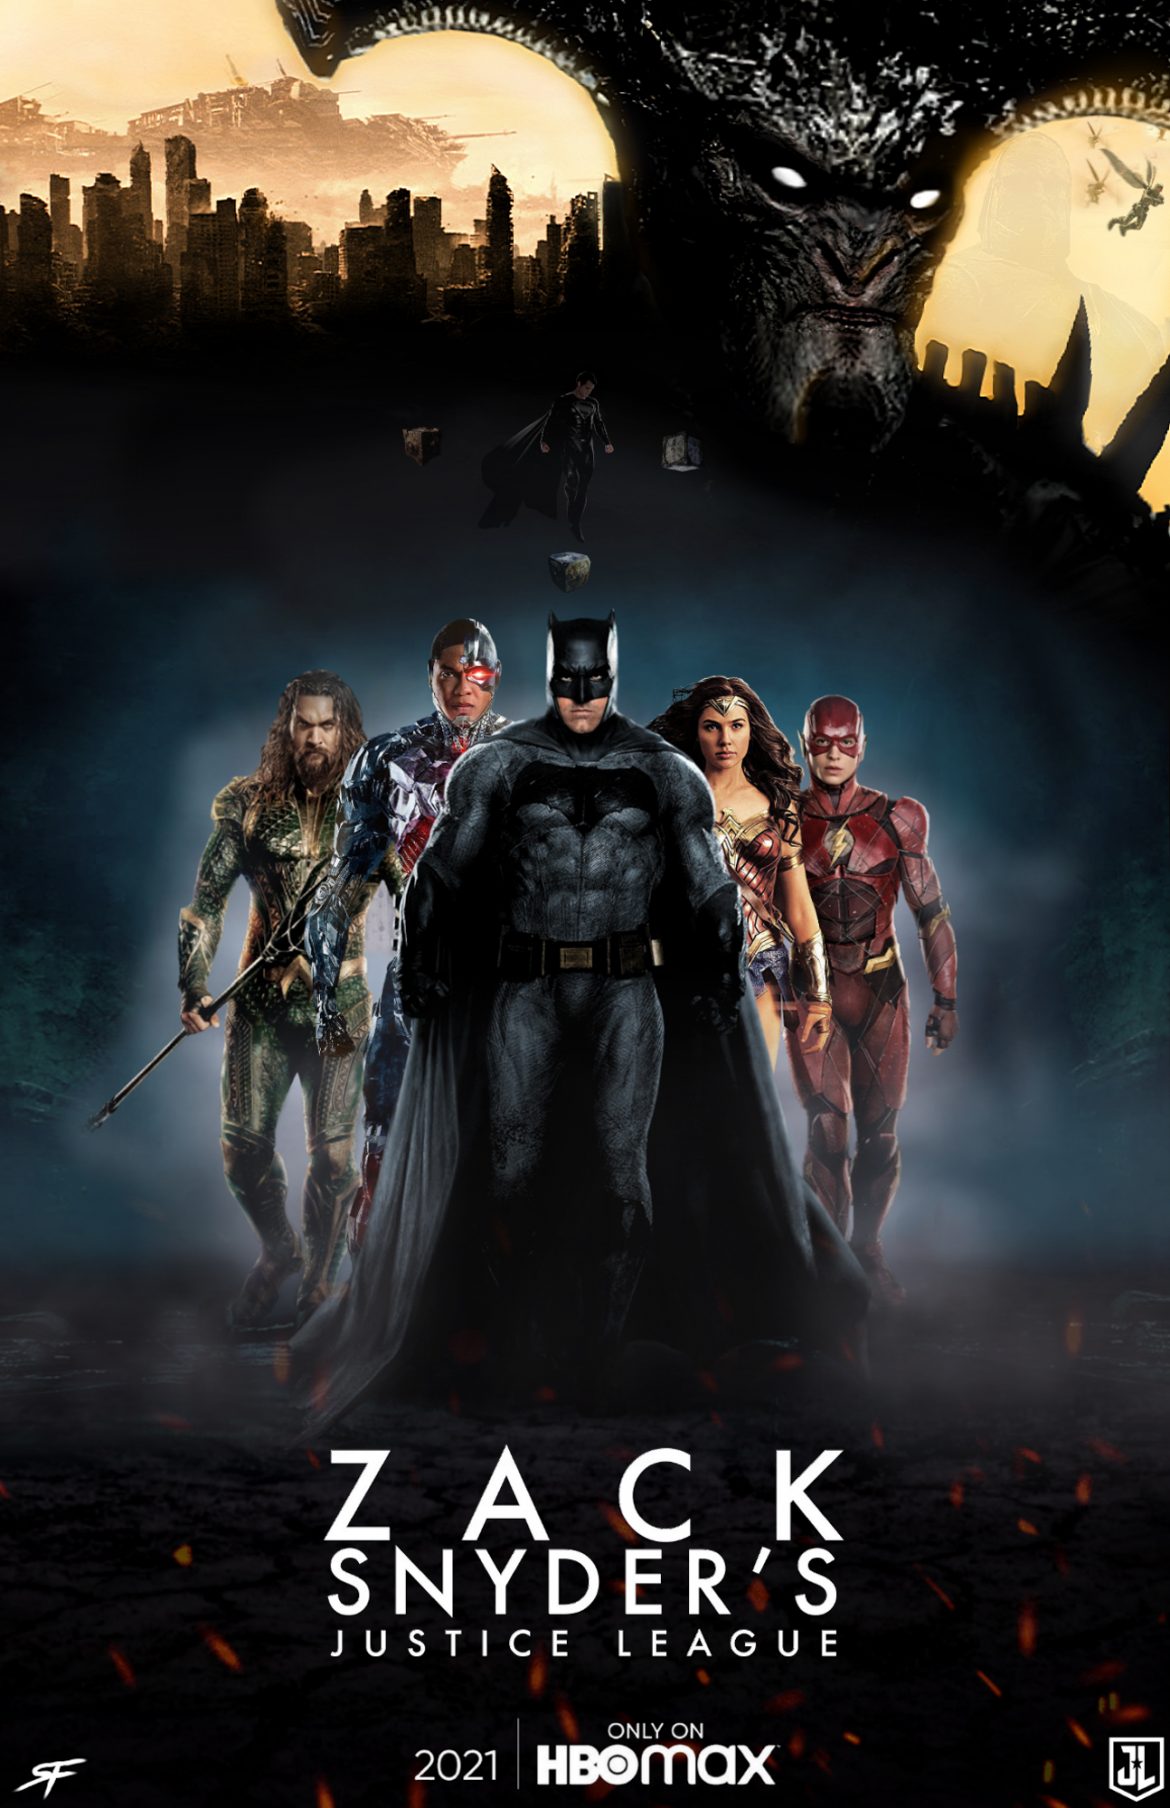 Zack Snyder's Justice League: Comparing it to the original